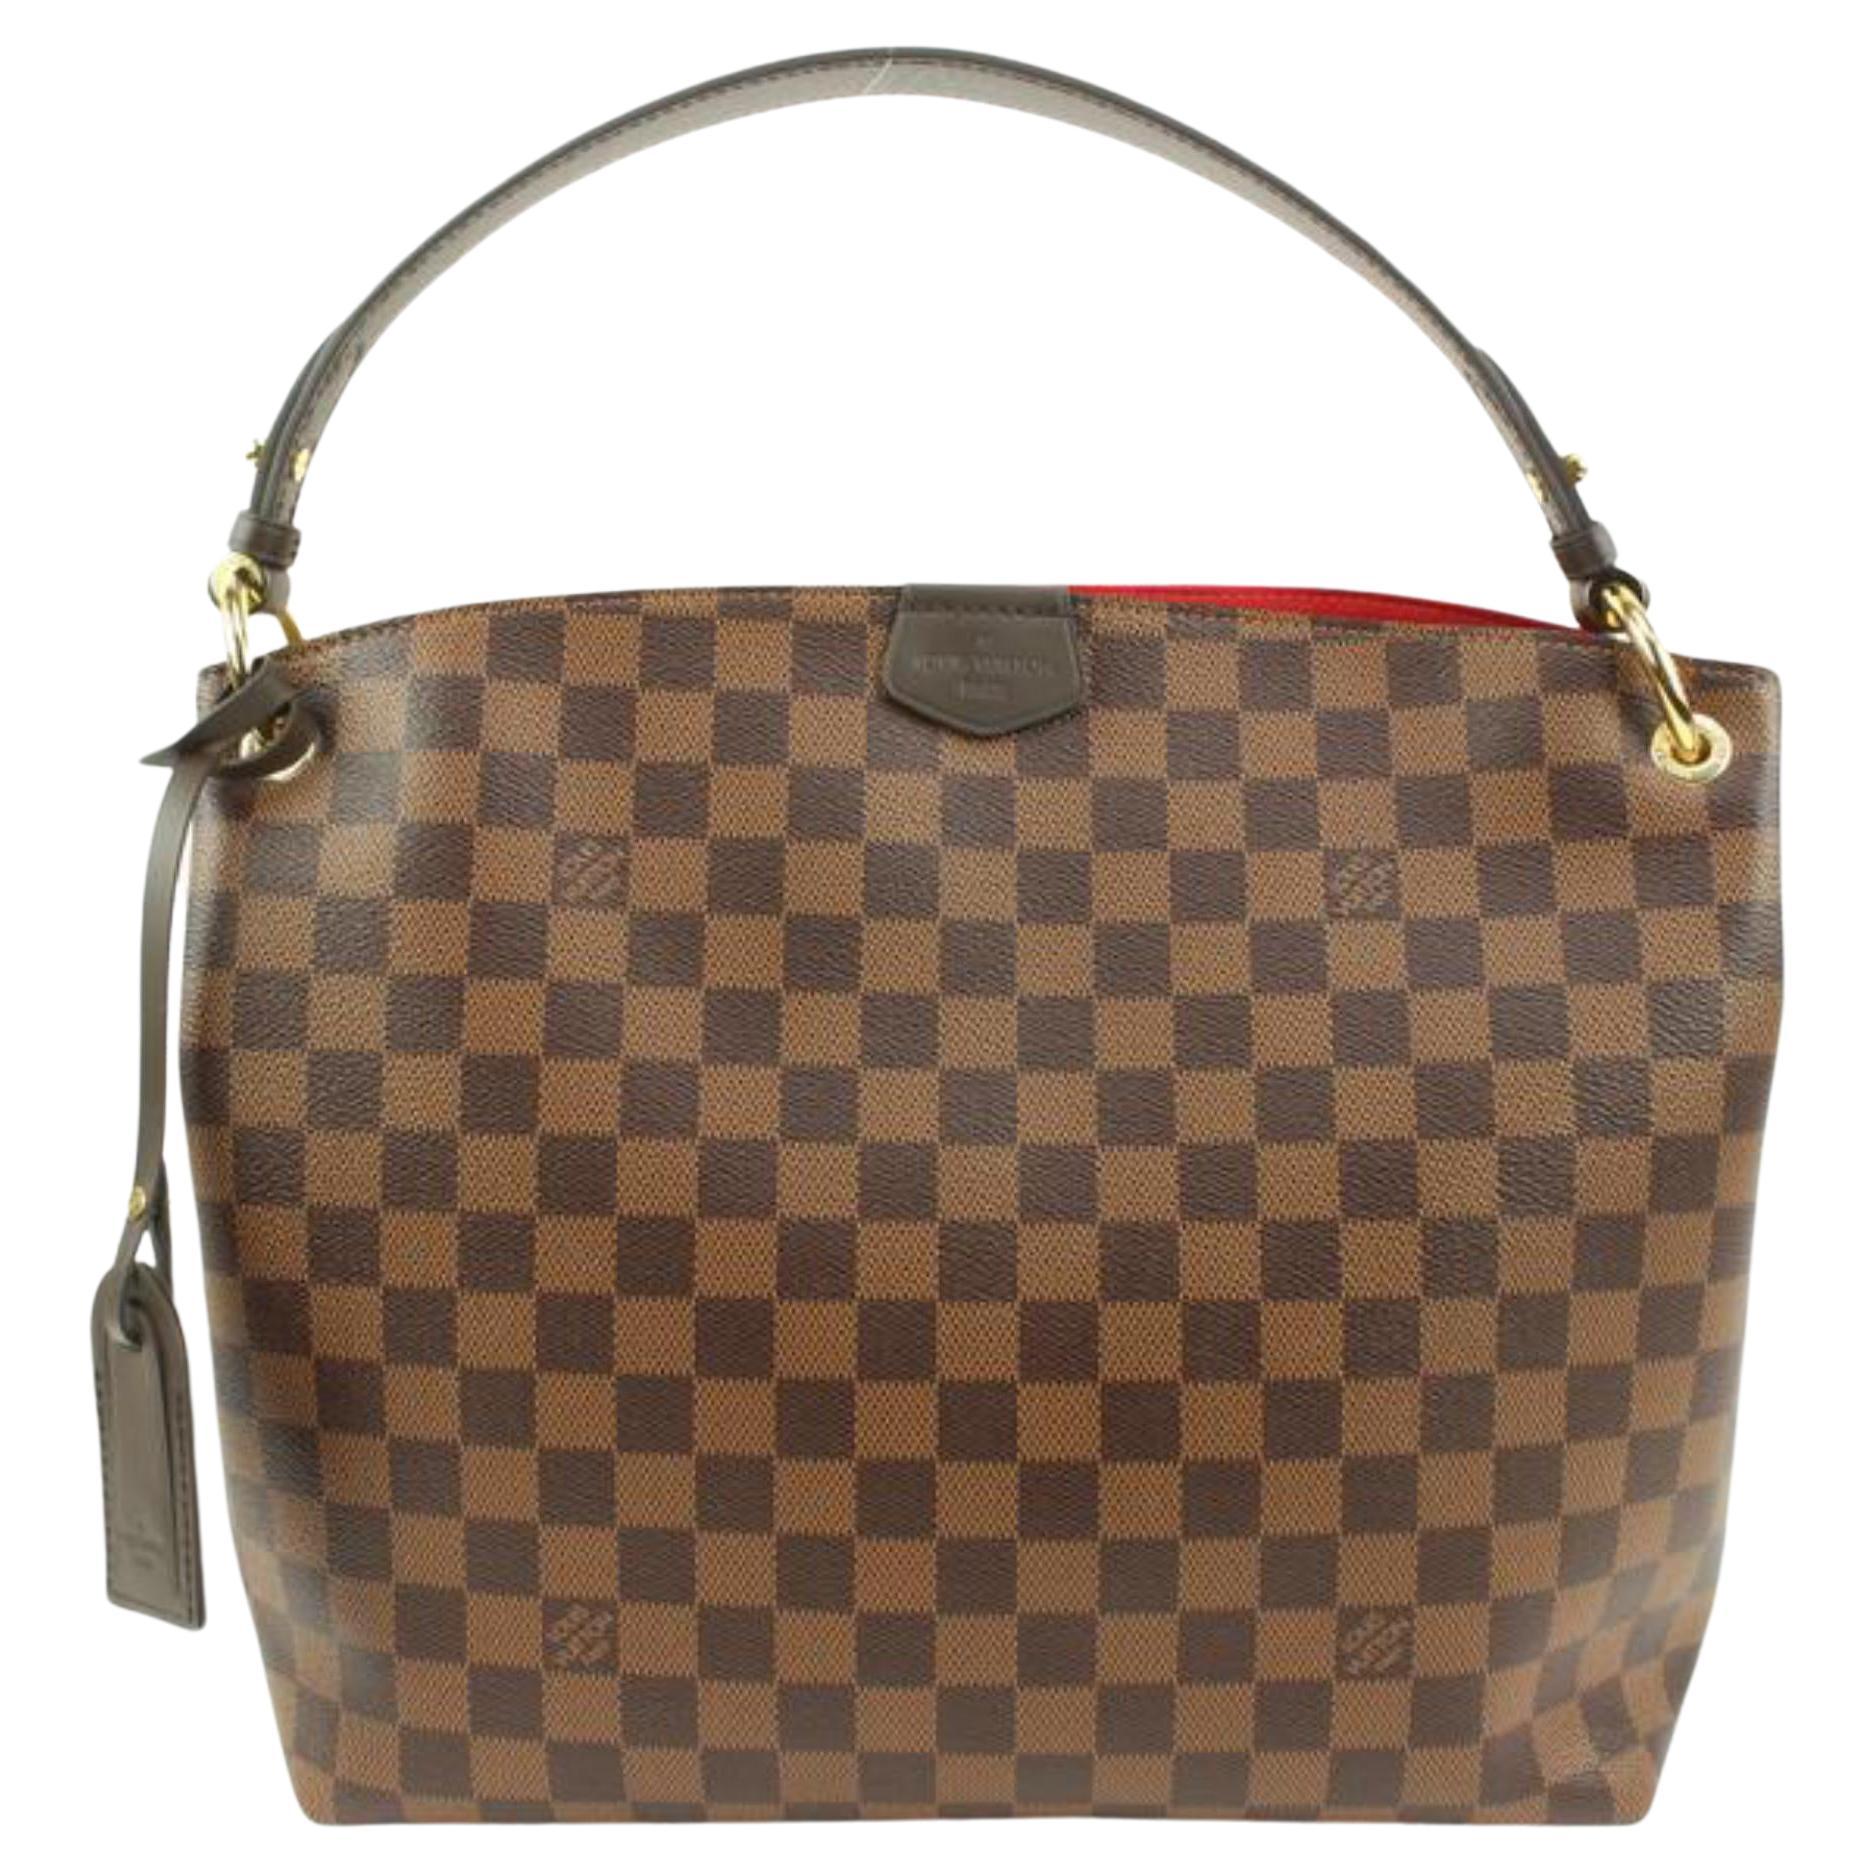 How much do Louis Vuitton purses cost? - Questions & Answers